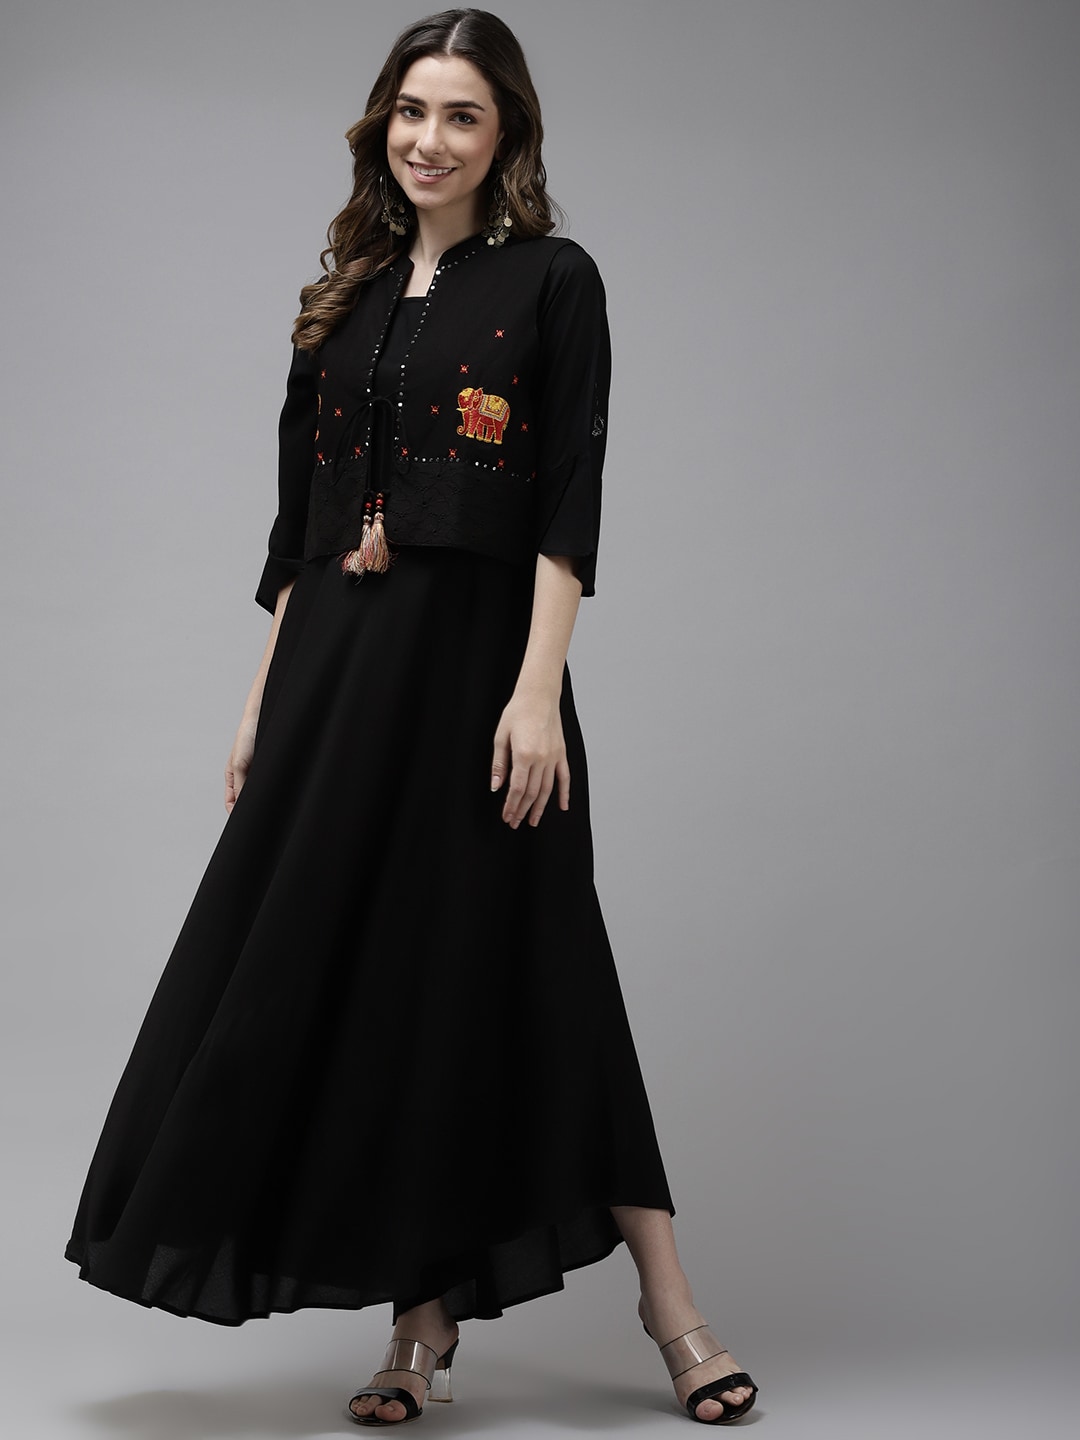 Yufta Black Solid Ethnic A-Line Midi Dress With Jacket Price in India